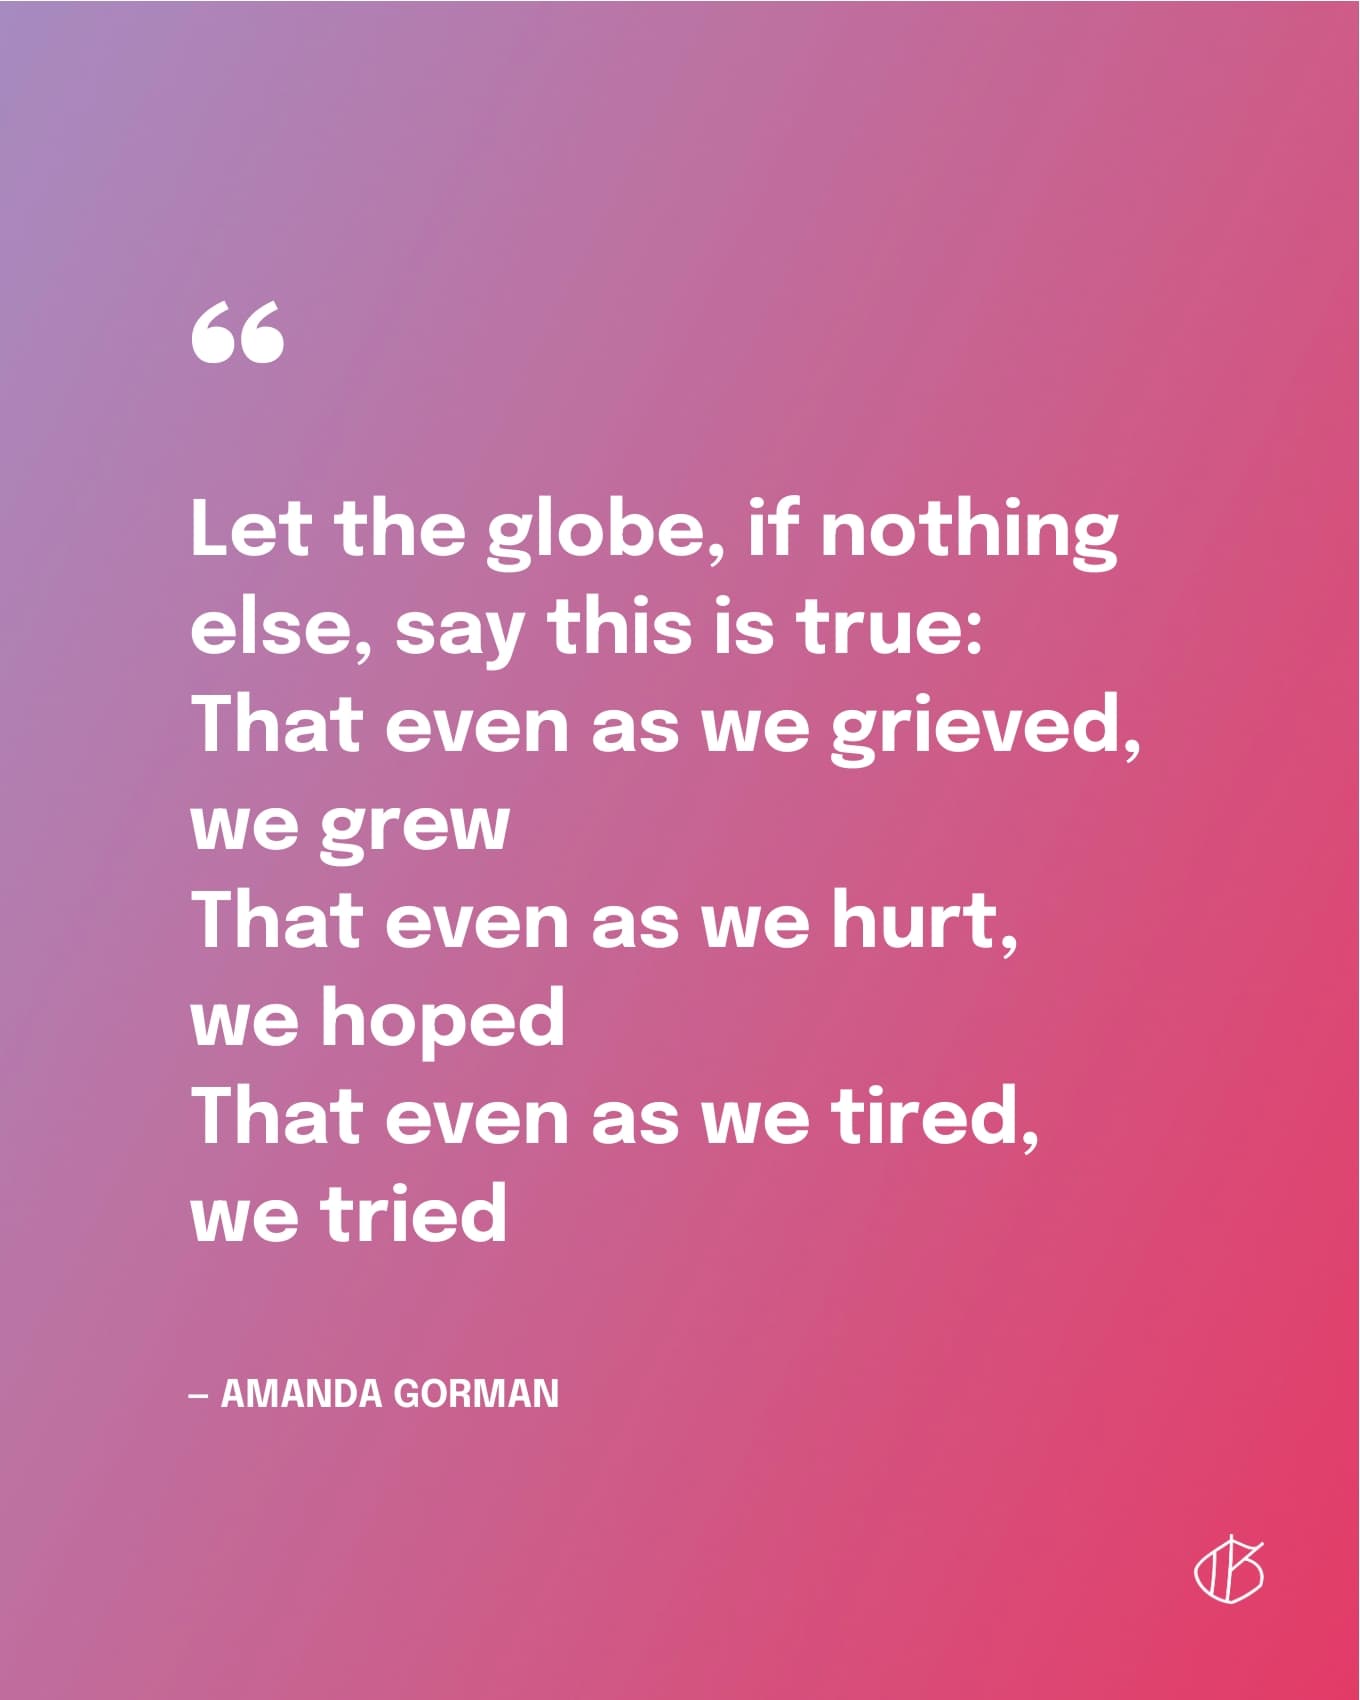 Let the globe, if nothing else, say this is true: That even as we grieved, we grew That even as we hurt, we hoped That even as we tired, we tried — Amanda Gorman quote